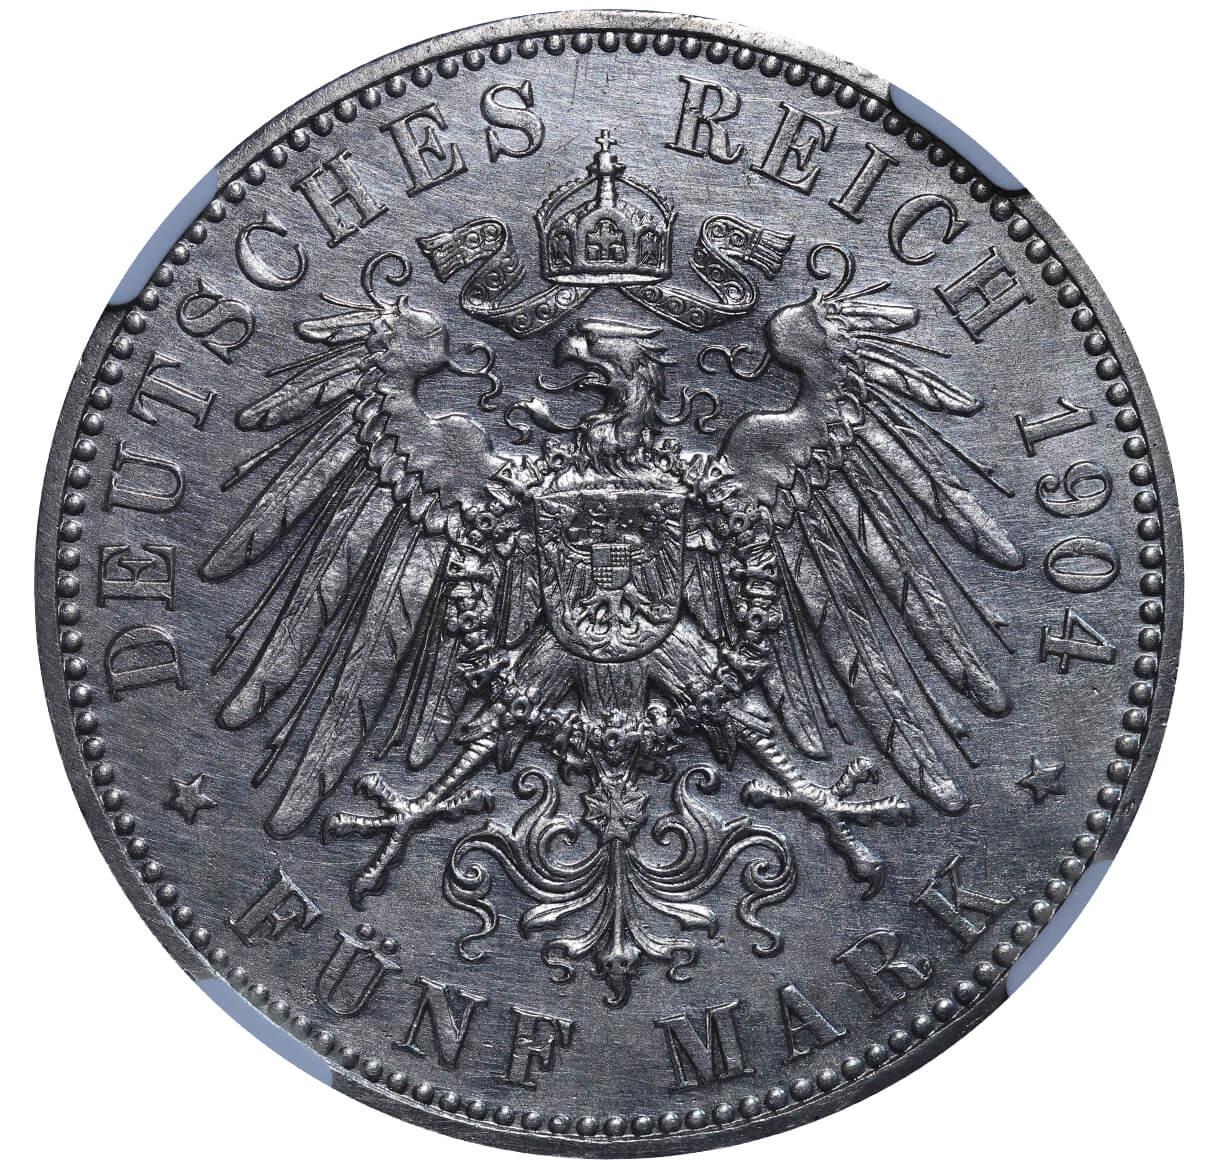 Grand duchy of Hessen-Darmstadt, 5 Mark, 1904 year, 400th Anniversary of Philipp the Magnanimous, NG - Image 3 of 3